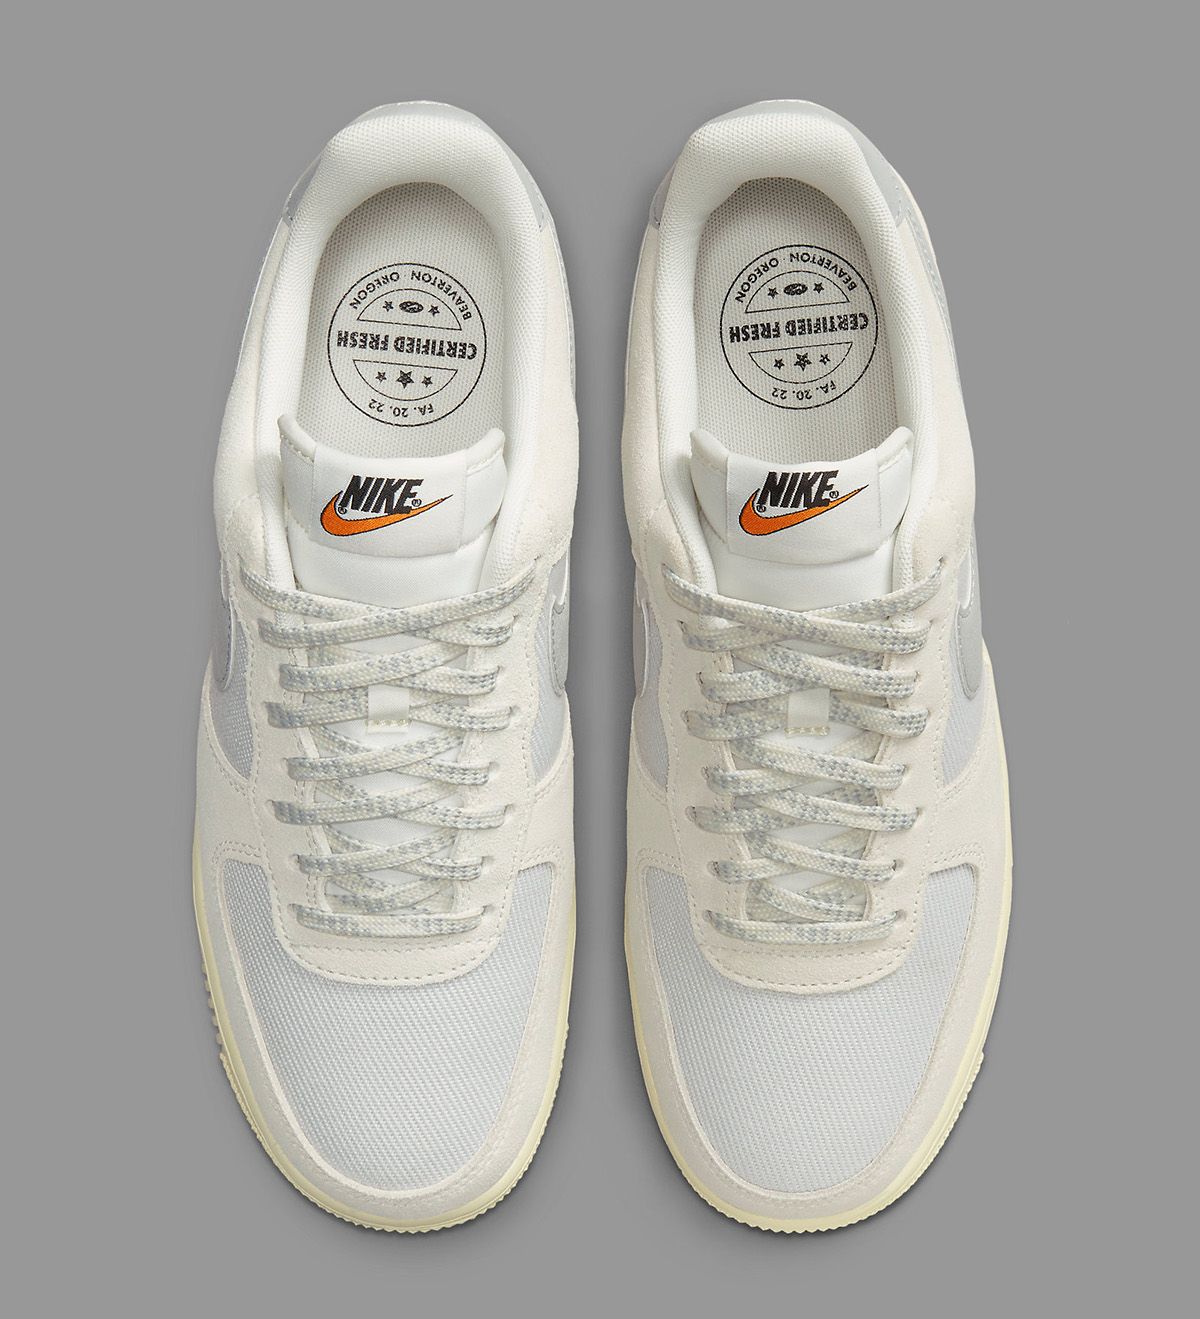 The Nike Air Force 1 LV8 - Smoke Grey / Photon Dust is now